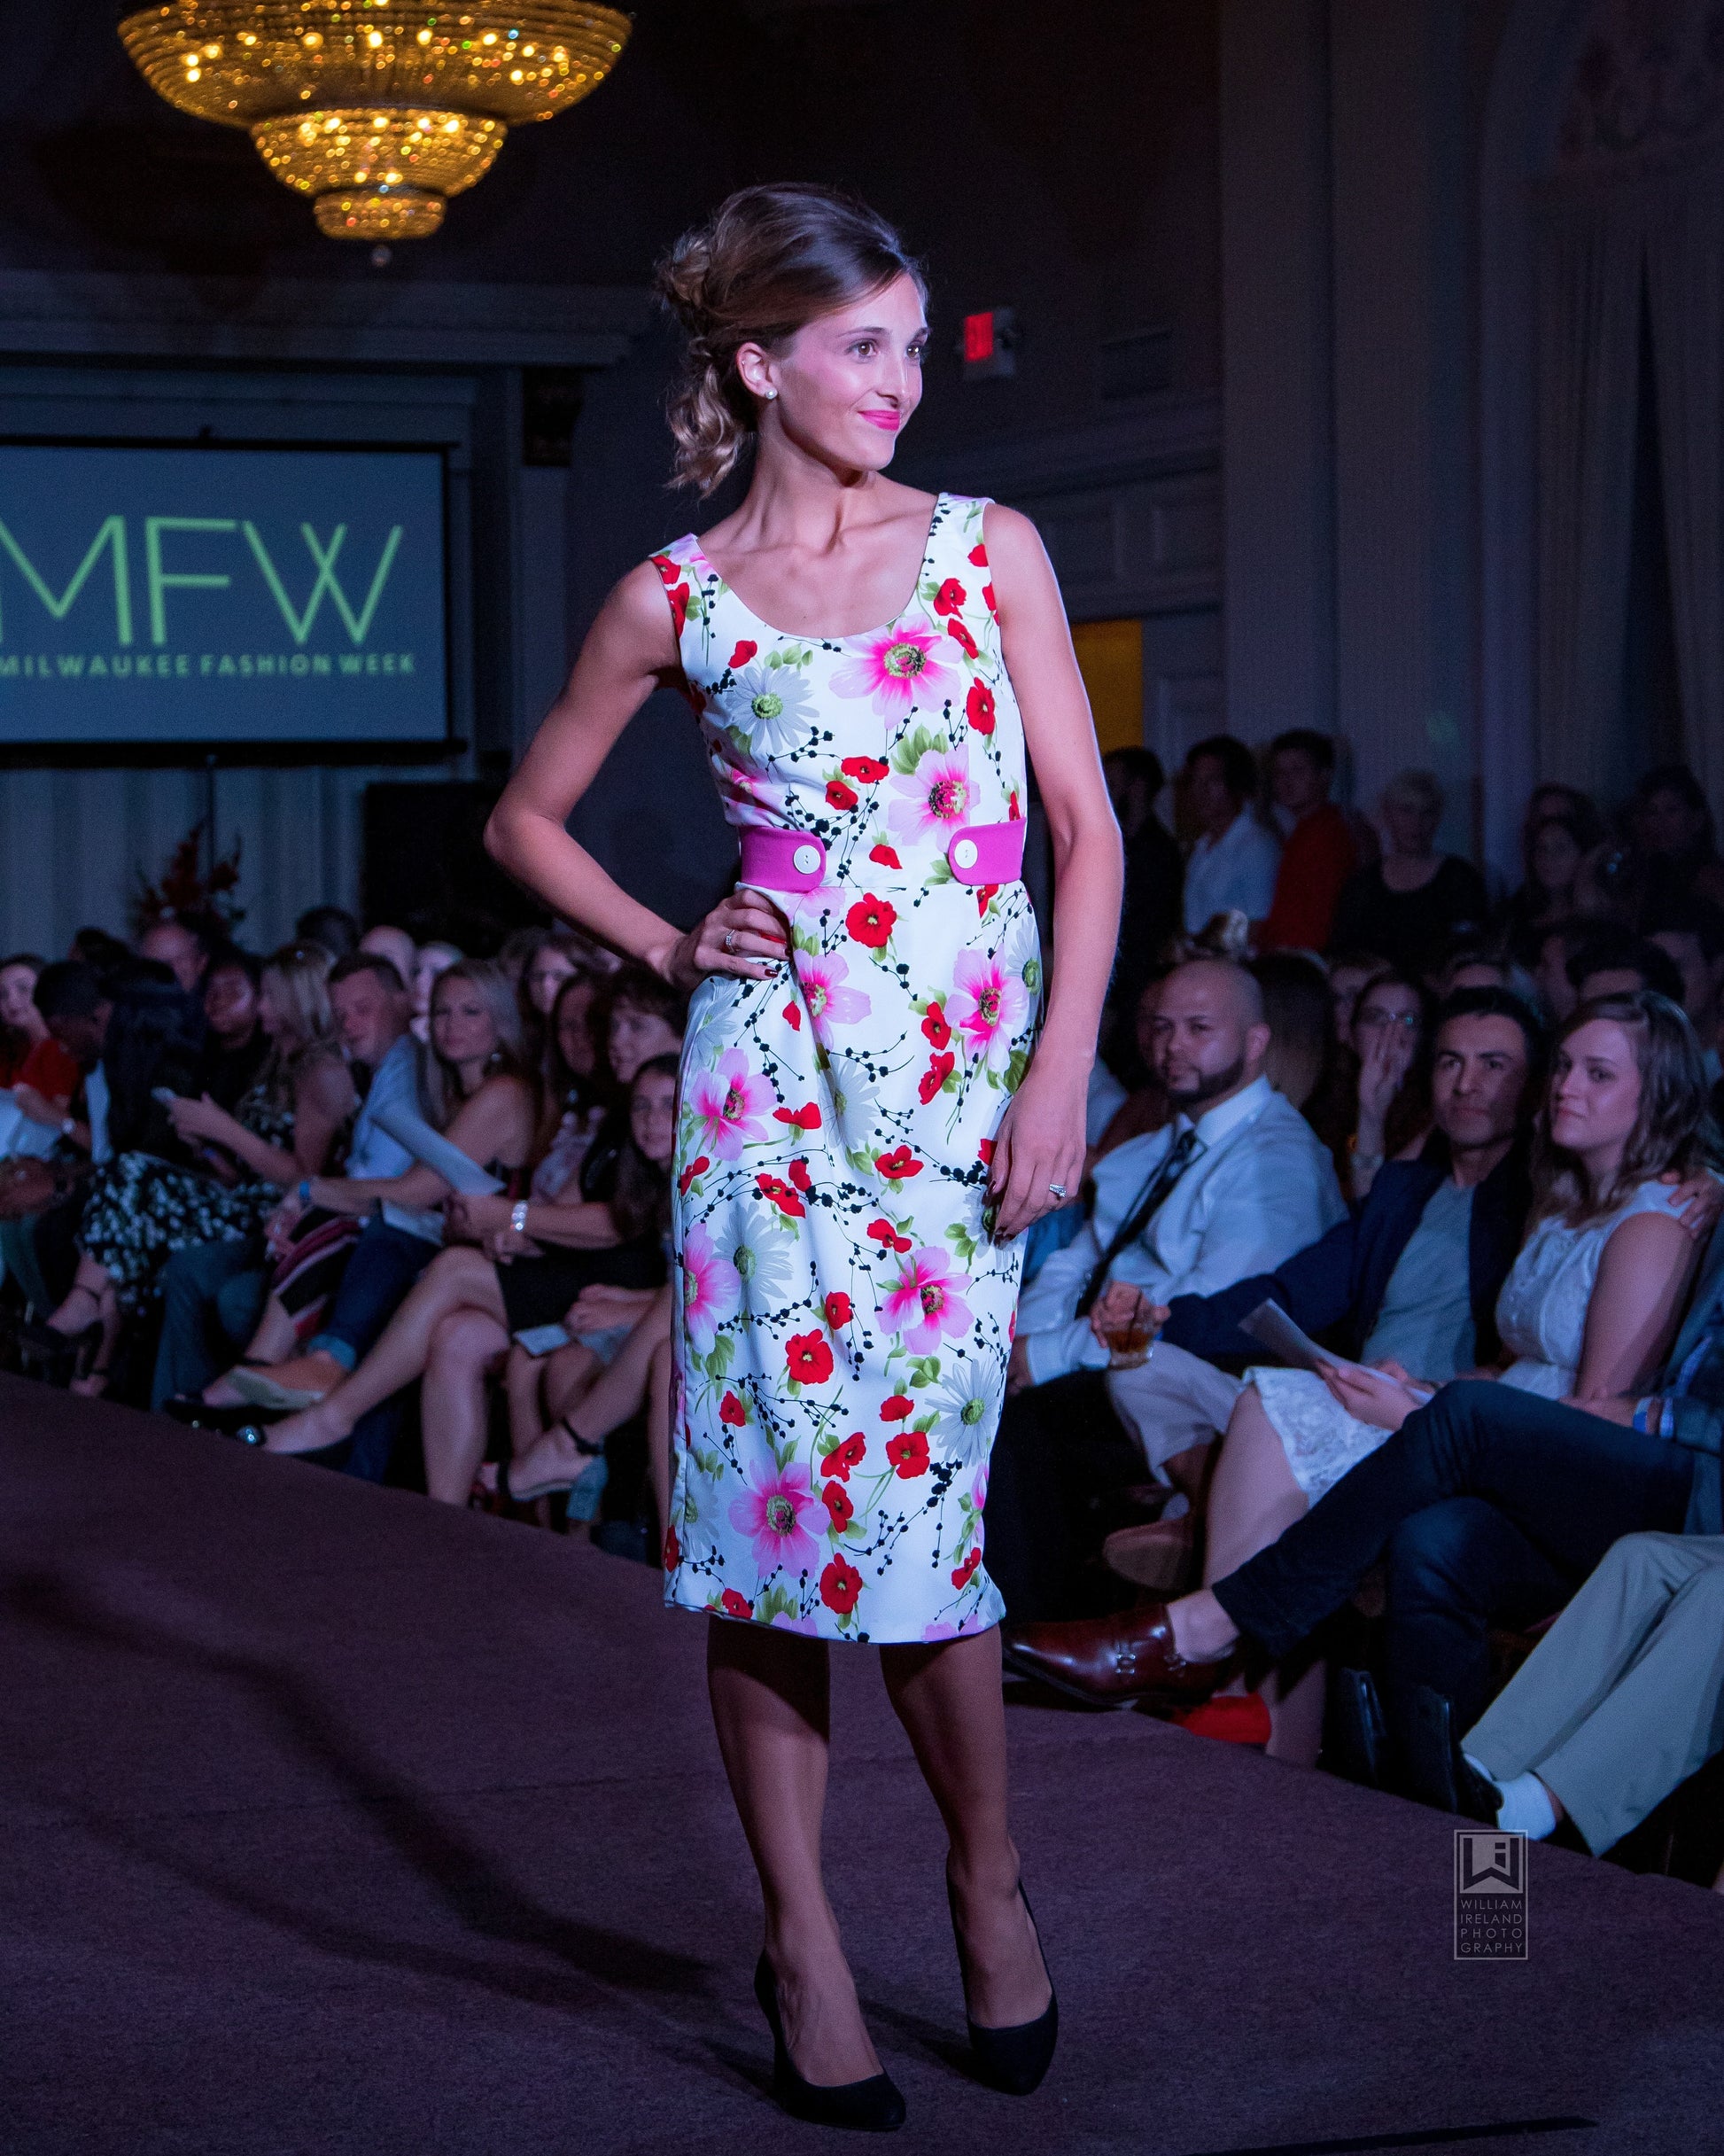 Pink Floral Wiggle Dress by Hollyville
Seen in Milwaukee Fashion Week